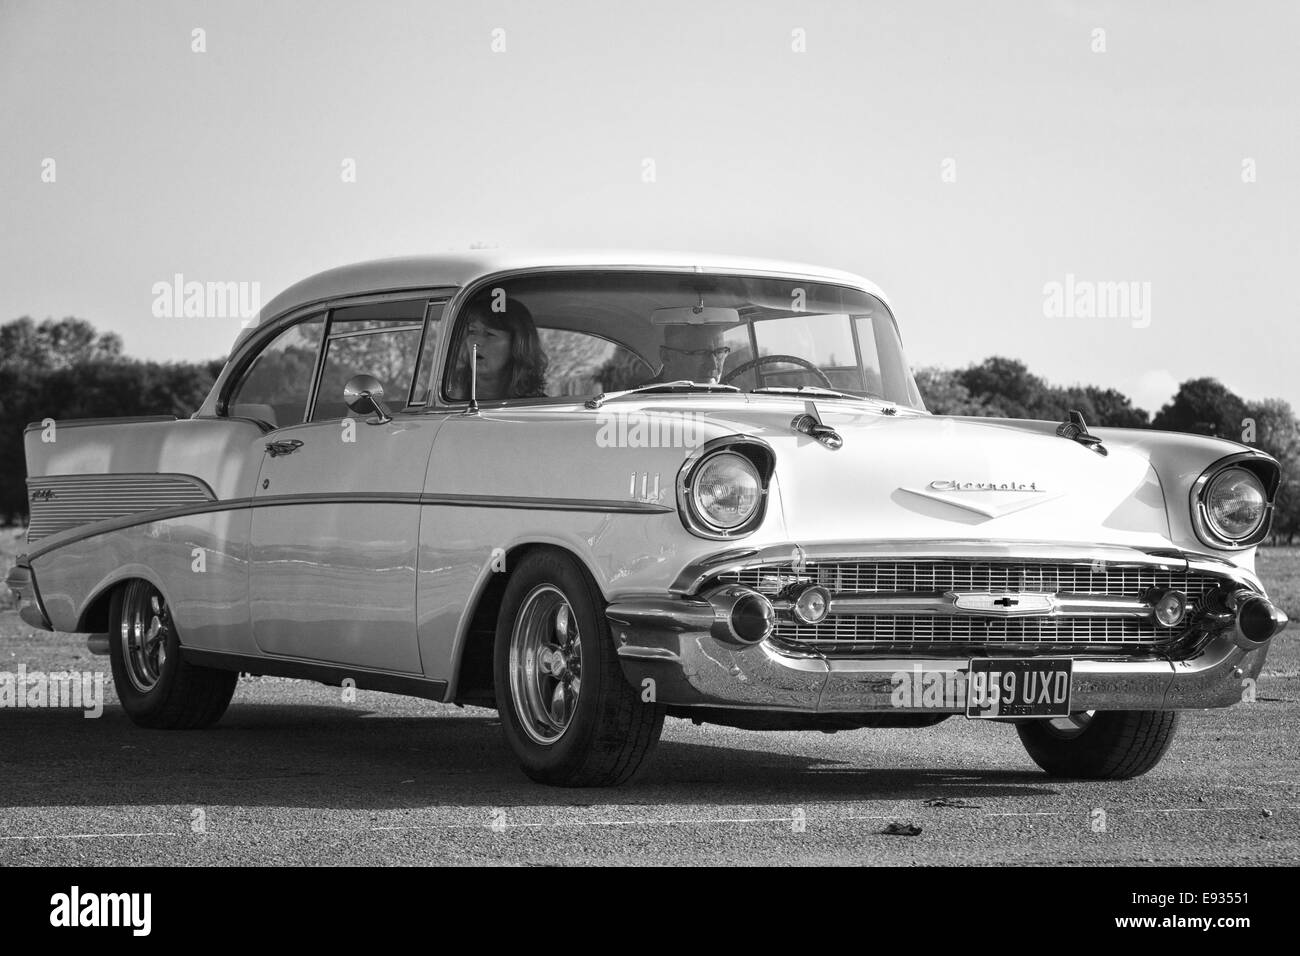 1950s Chevrolet. Chevy. Classic American car Black and White Stock Photo